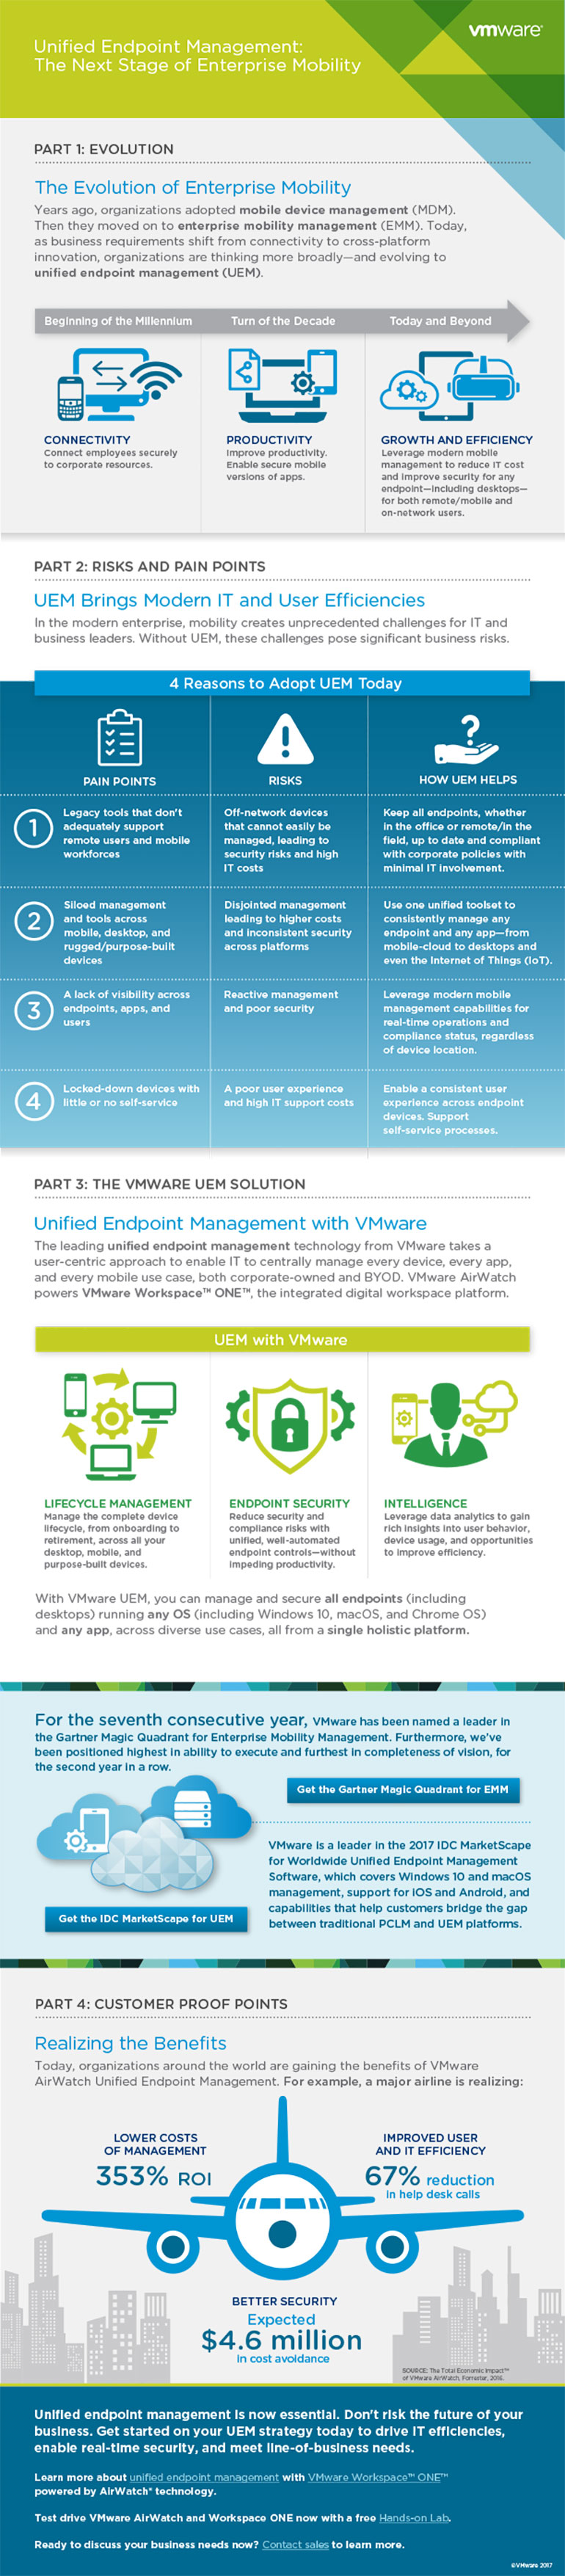 Unified Endpoint Management: The Next Stage of Enterprise Mobility infographic